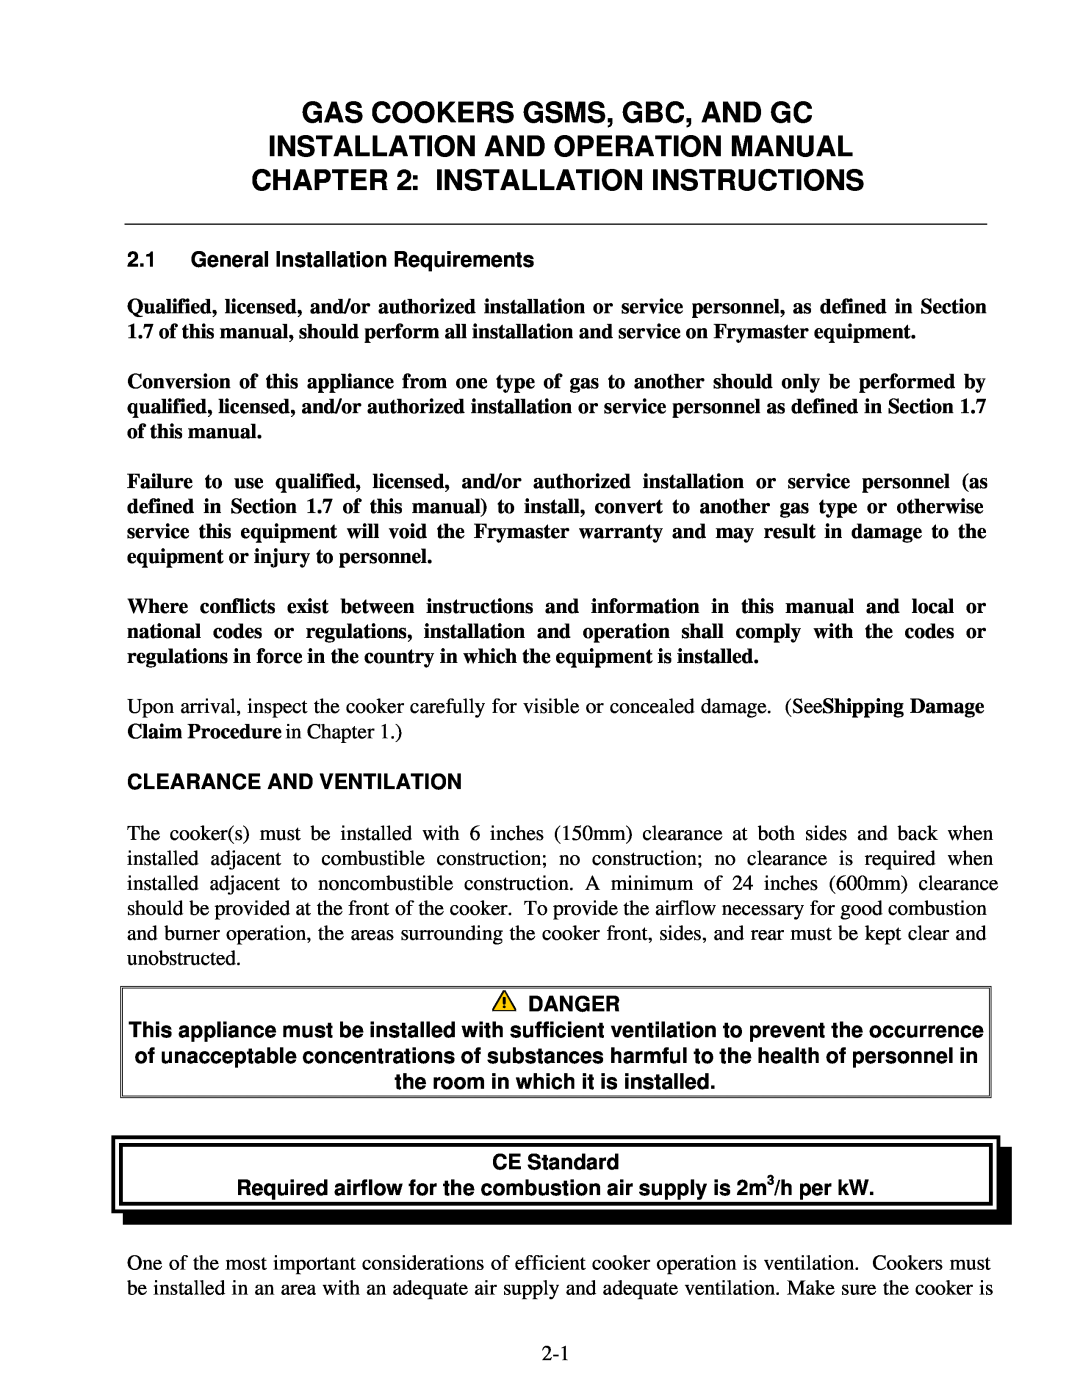 Frymaster GC, GSMS Installation Instructions, 2.1General Installation Requirements, Clearance And Ventilation, CE Standard 